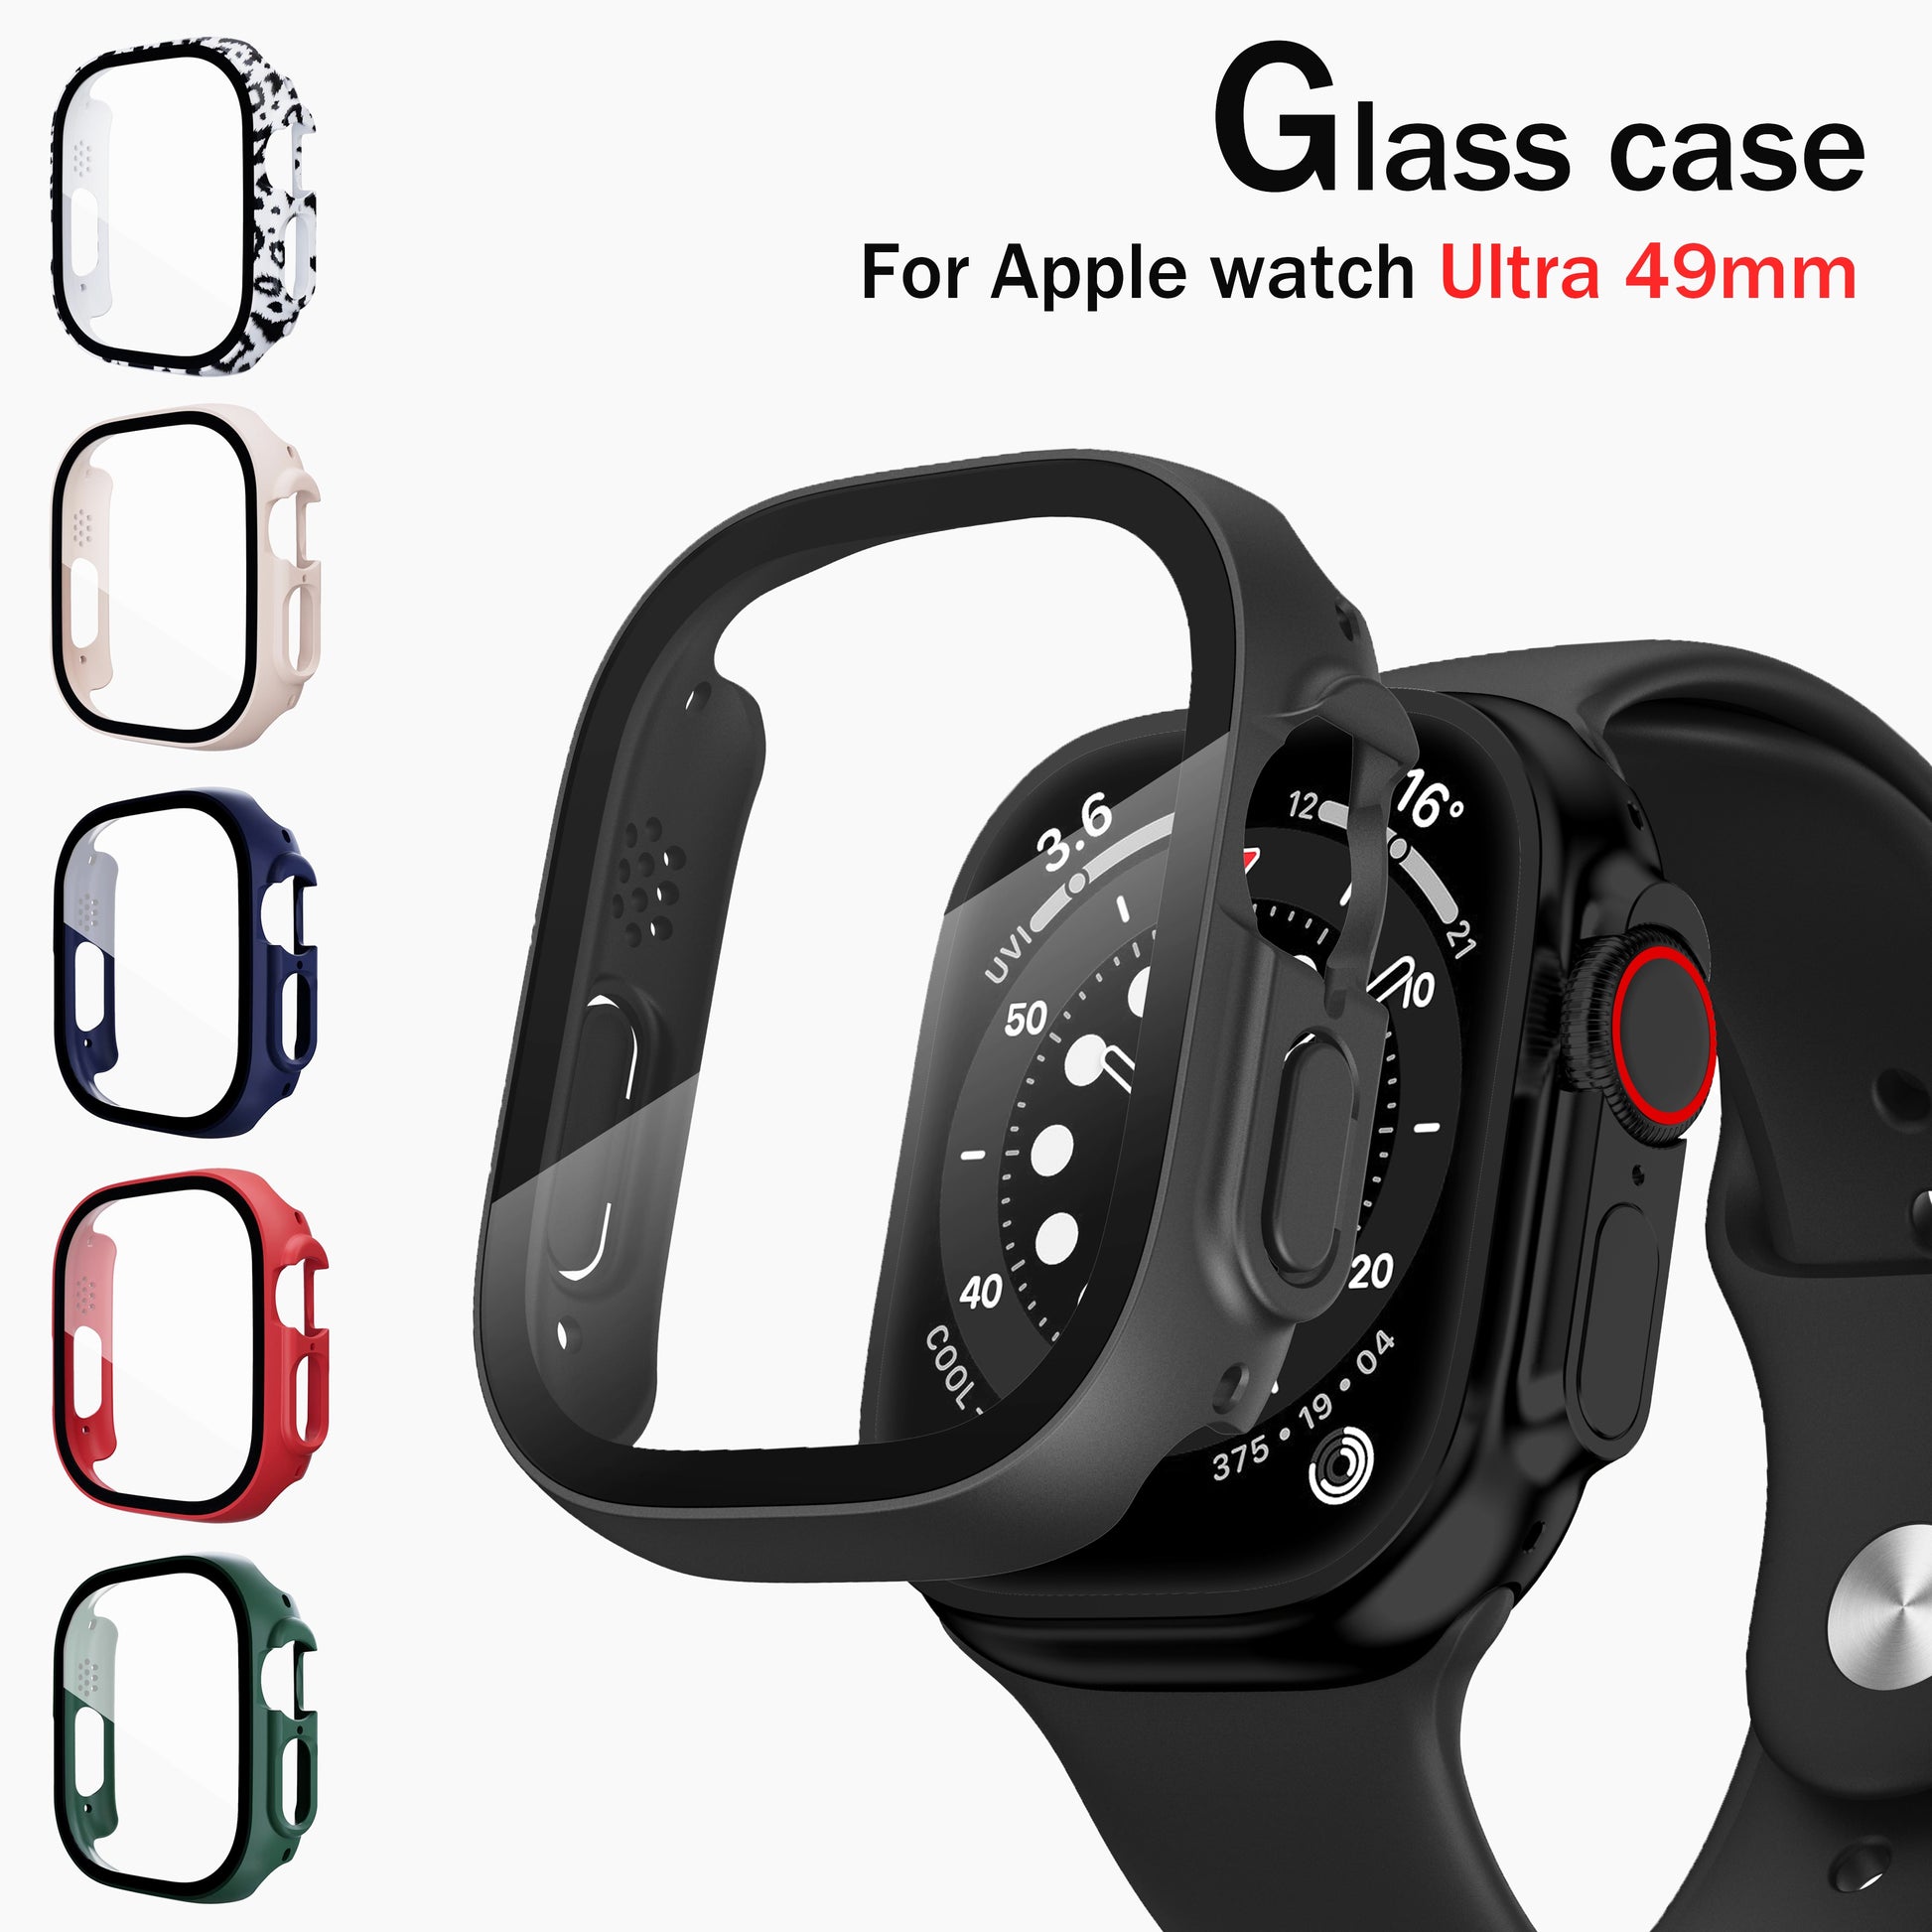 Tempered Glass Case Cover For Apple Watch Ultra 49mm - Wristwatchstraps.co